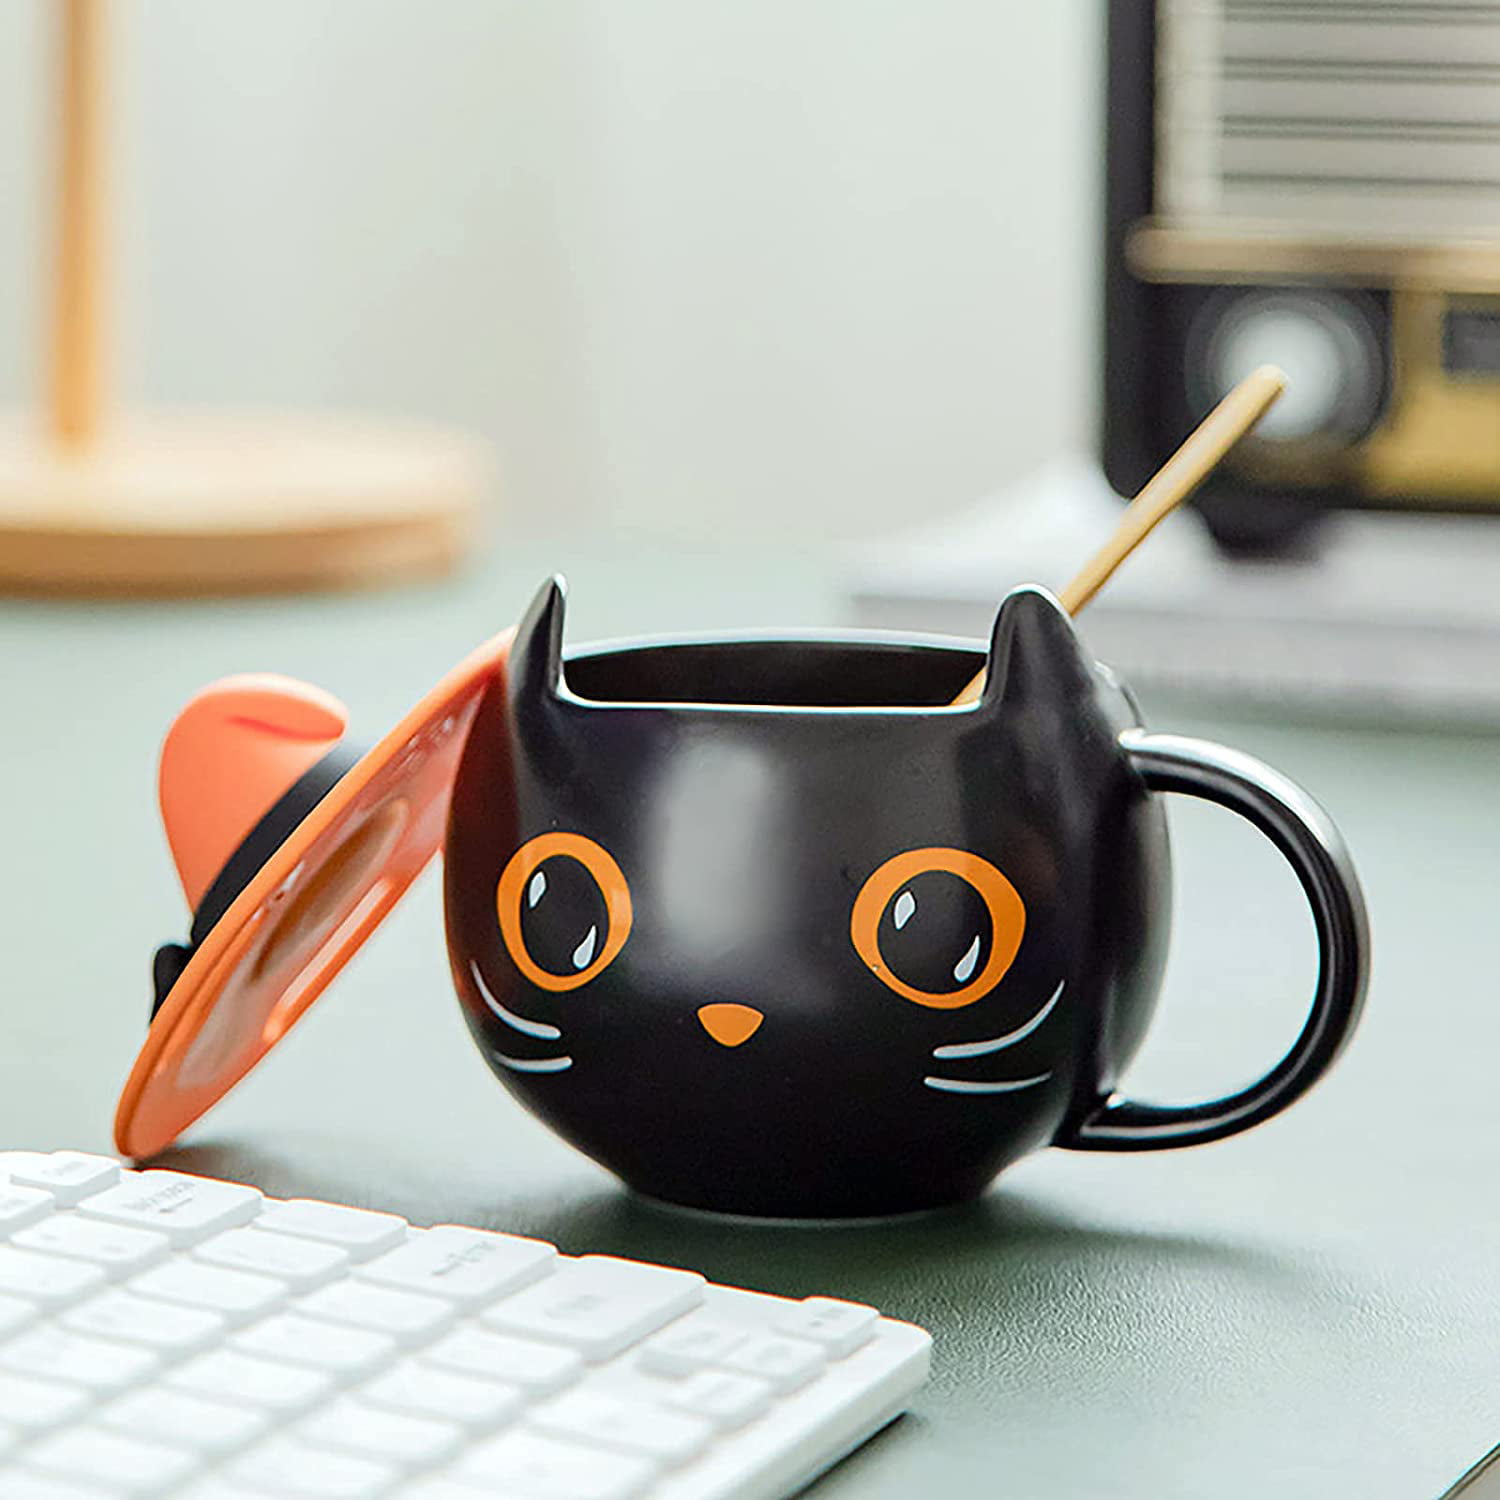 Cute Kitty Unique Ceramic Coffee Mug for Halloween Cat Lovers,Home Birthday Gift for Women Men 2021 Halloween Black Cat Cup with Witch Cap and Spoon Gifts Cat Spoon Cover